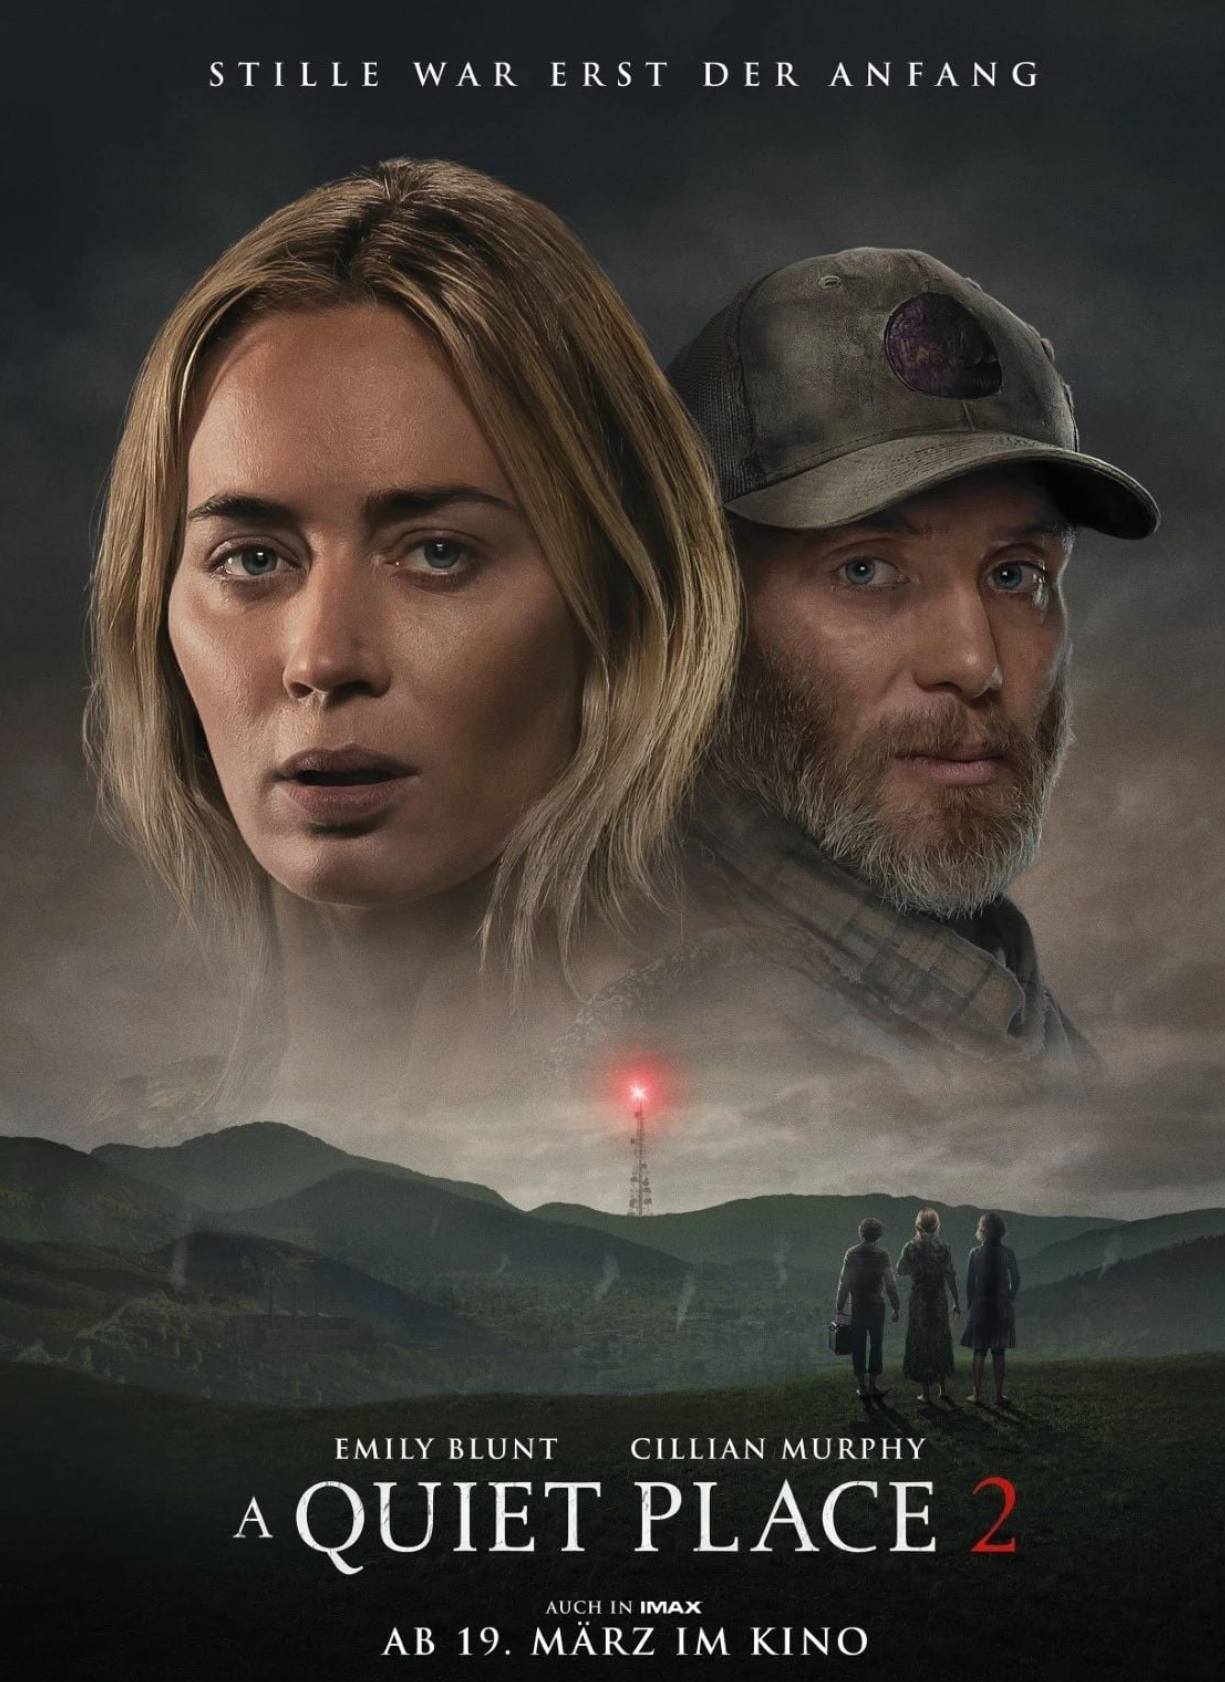 Quiet Place 2 poster with a blonde woman and a mand with a beard overlook a field